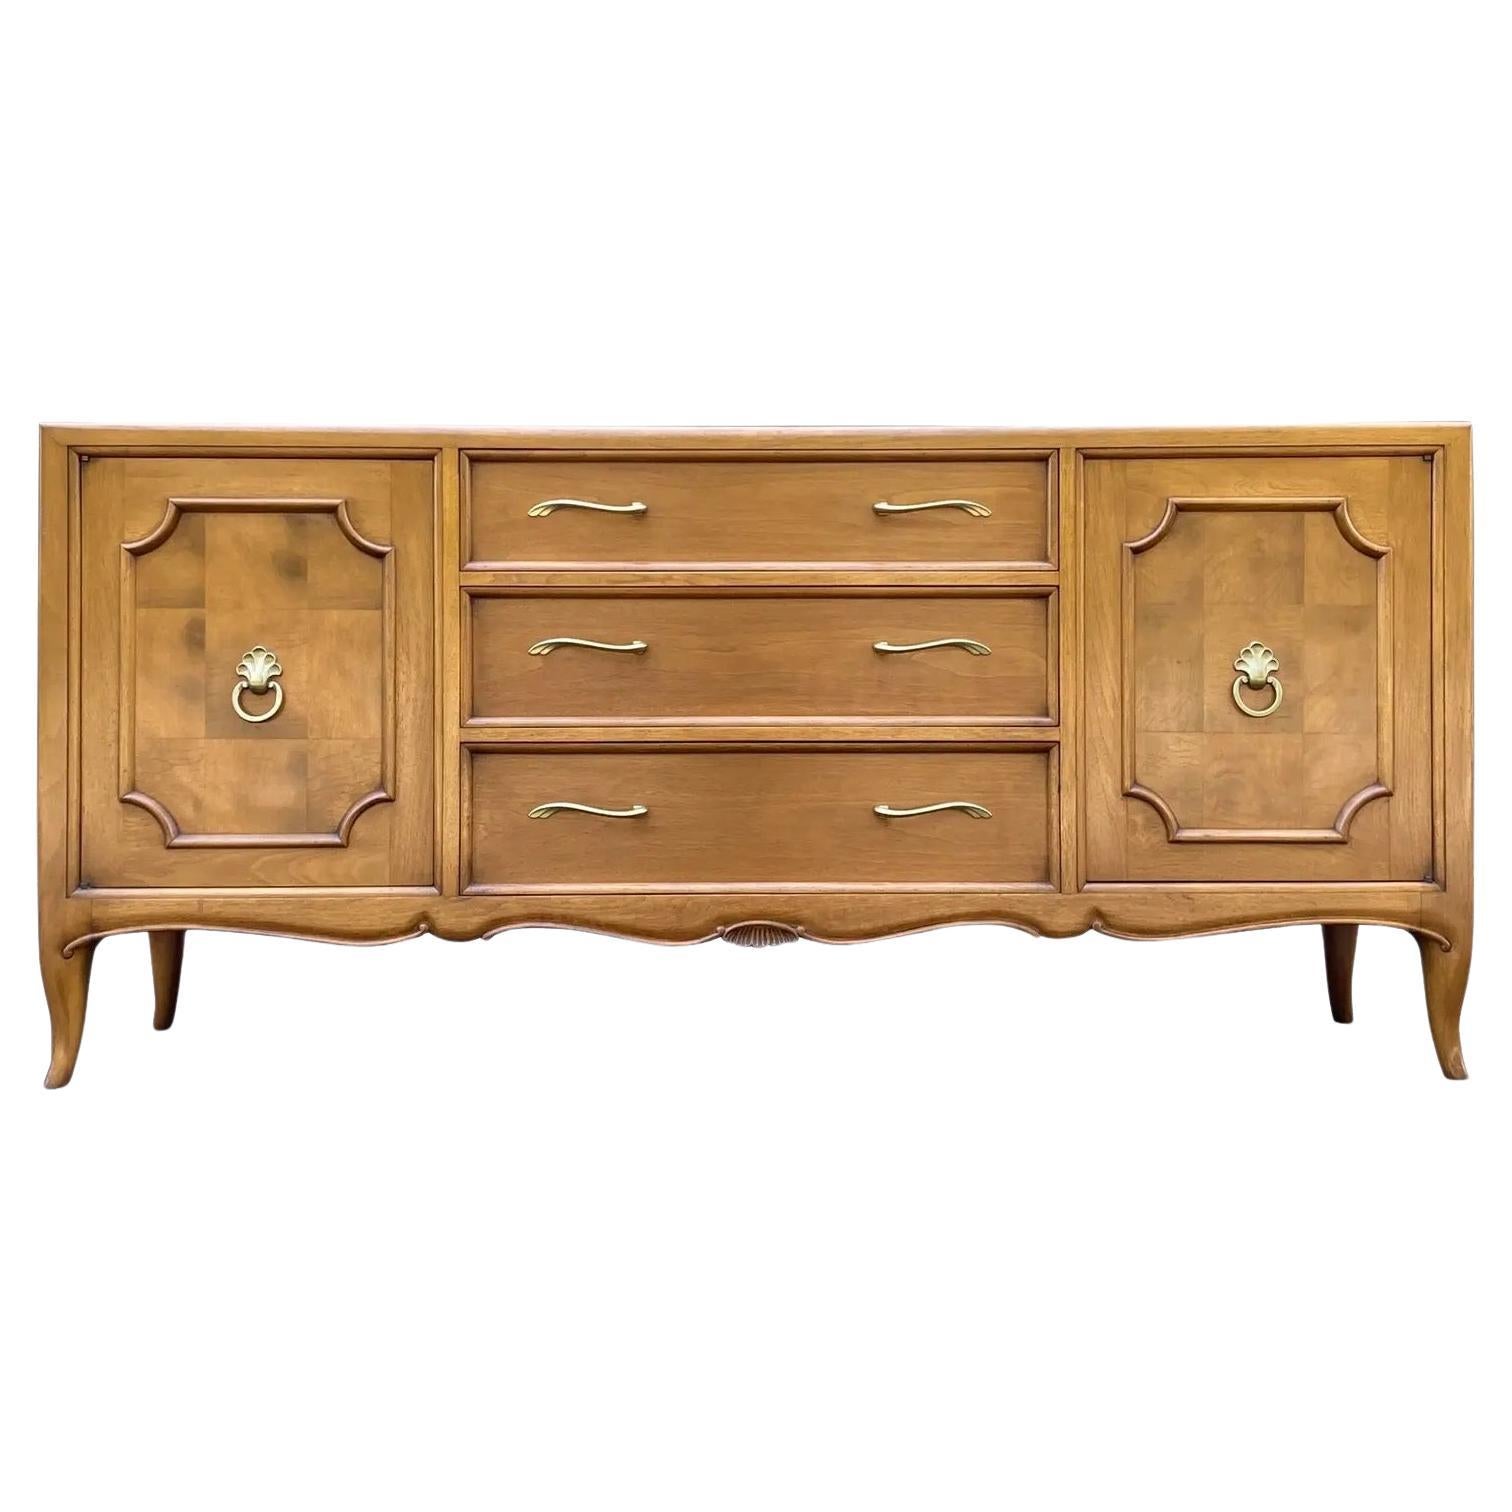 Mount Airy for John Stuart French Deco Style Walnut Credenza For Sale